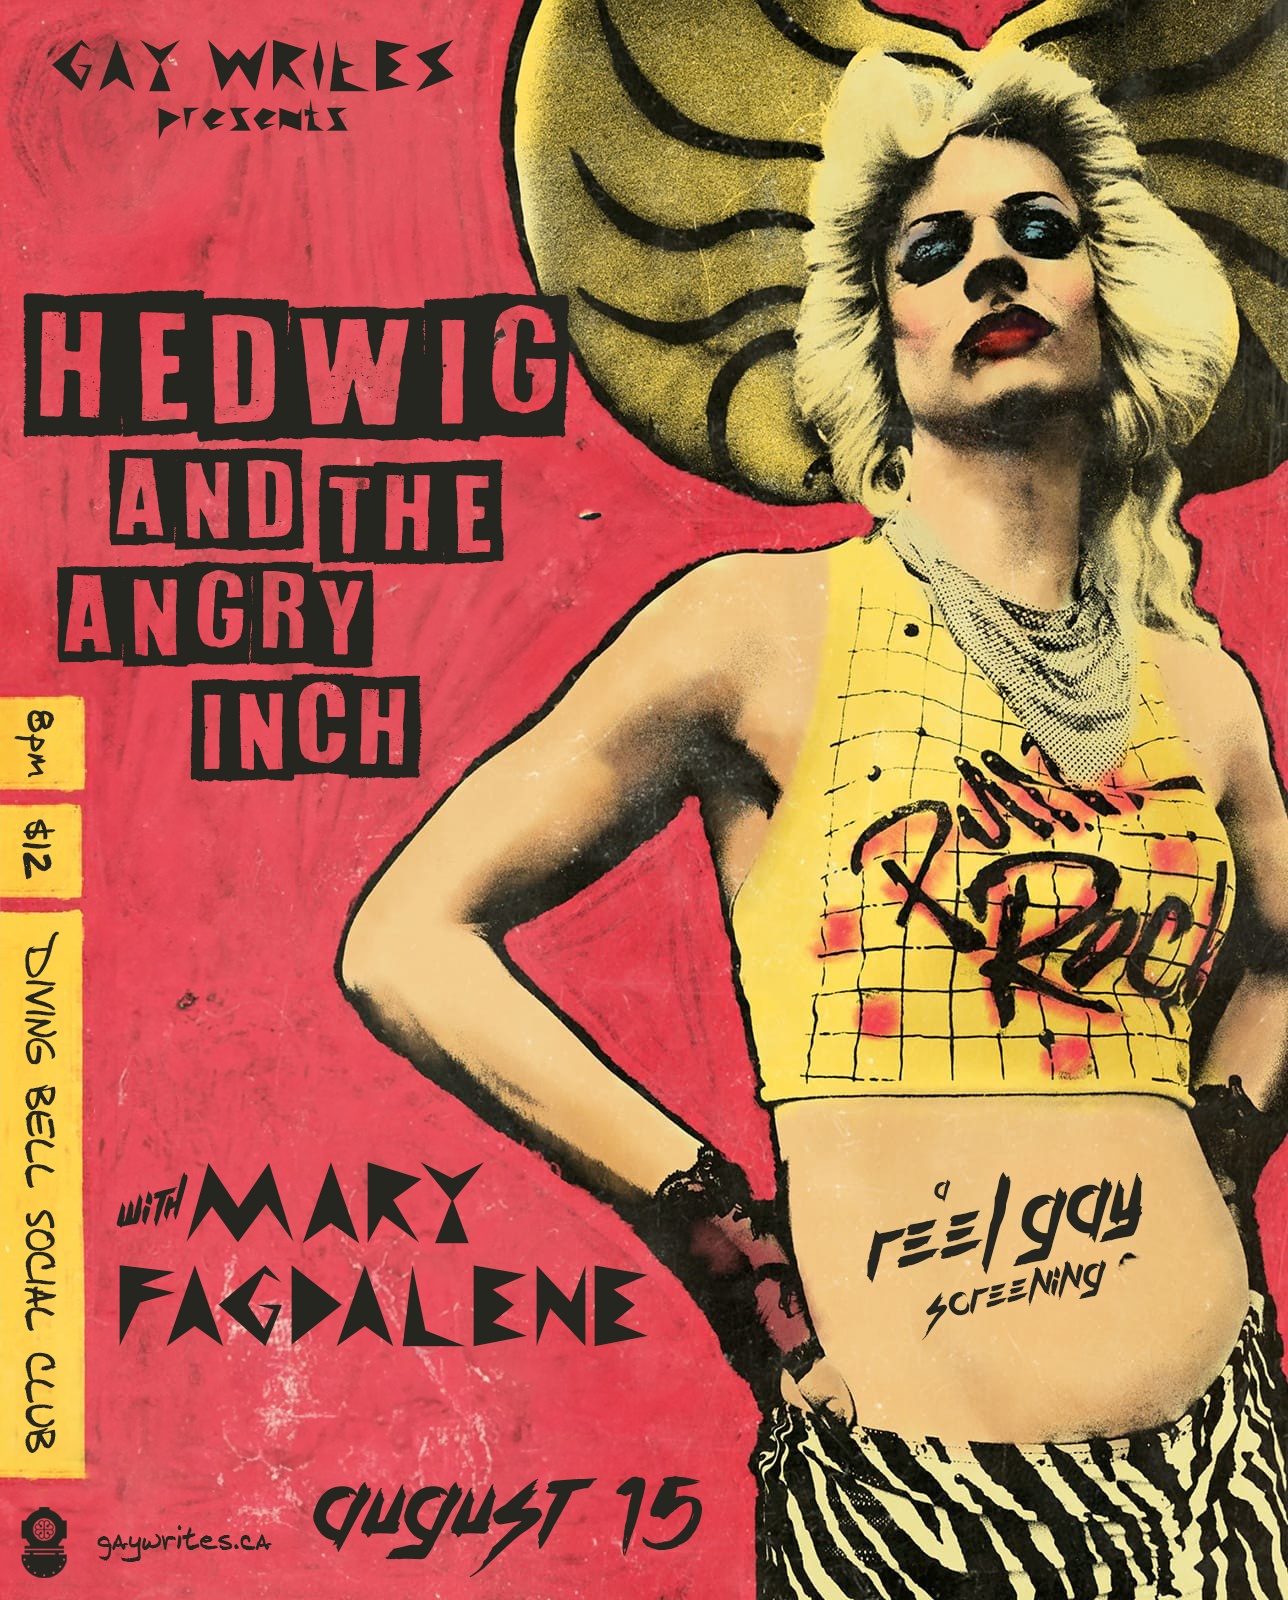 REEL GAY: Hedwig and the Angry Inch